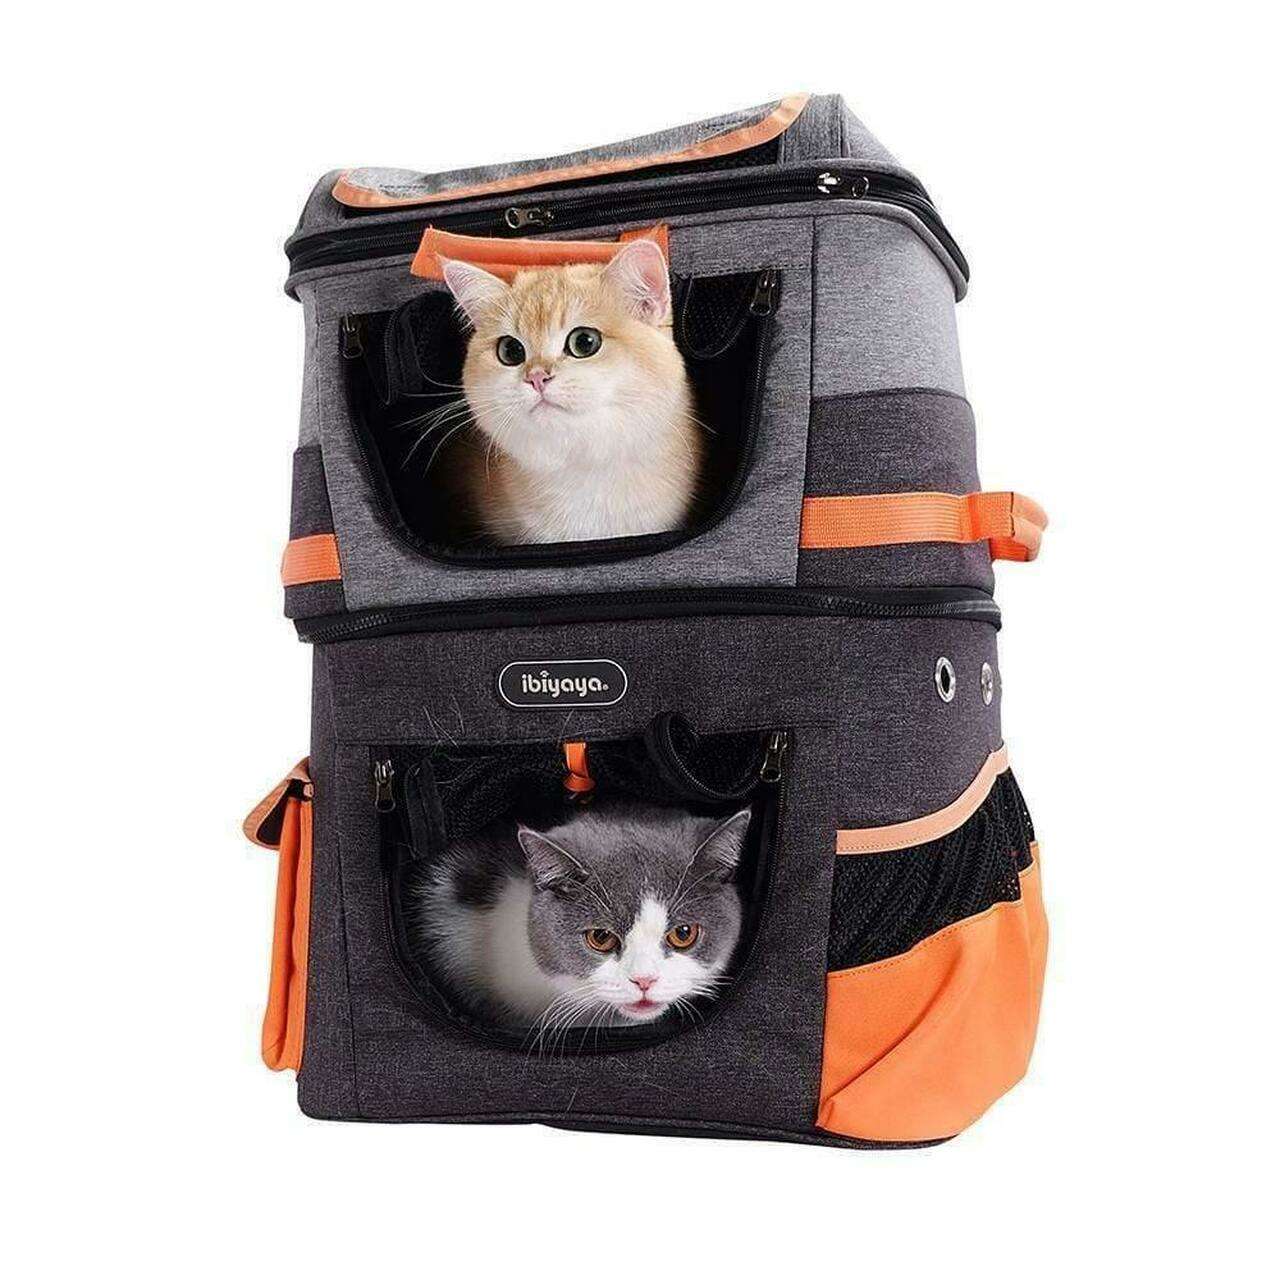 Cat Stroller vs. Cat Carrier: What's Best For Your Cat